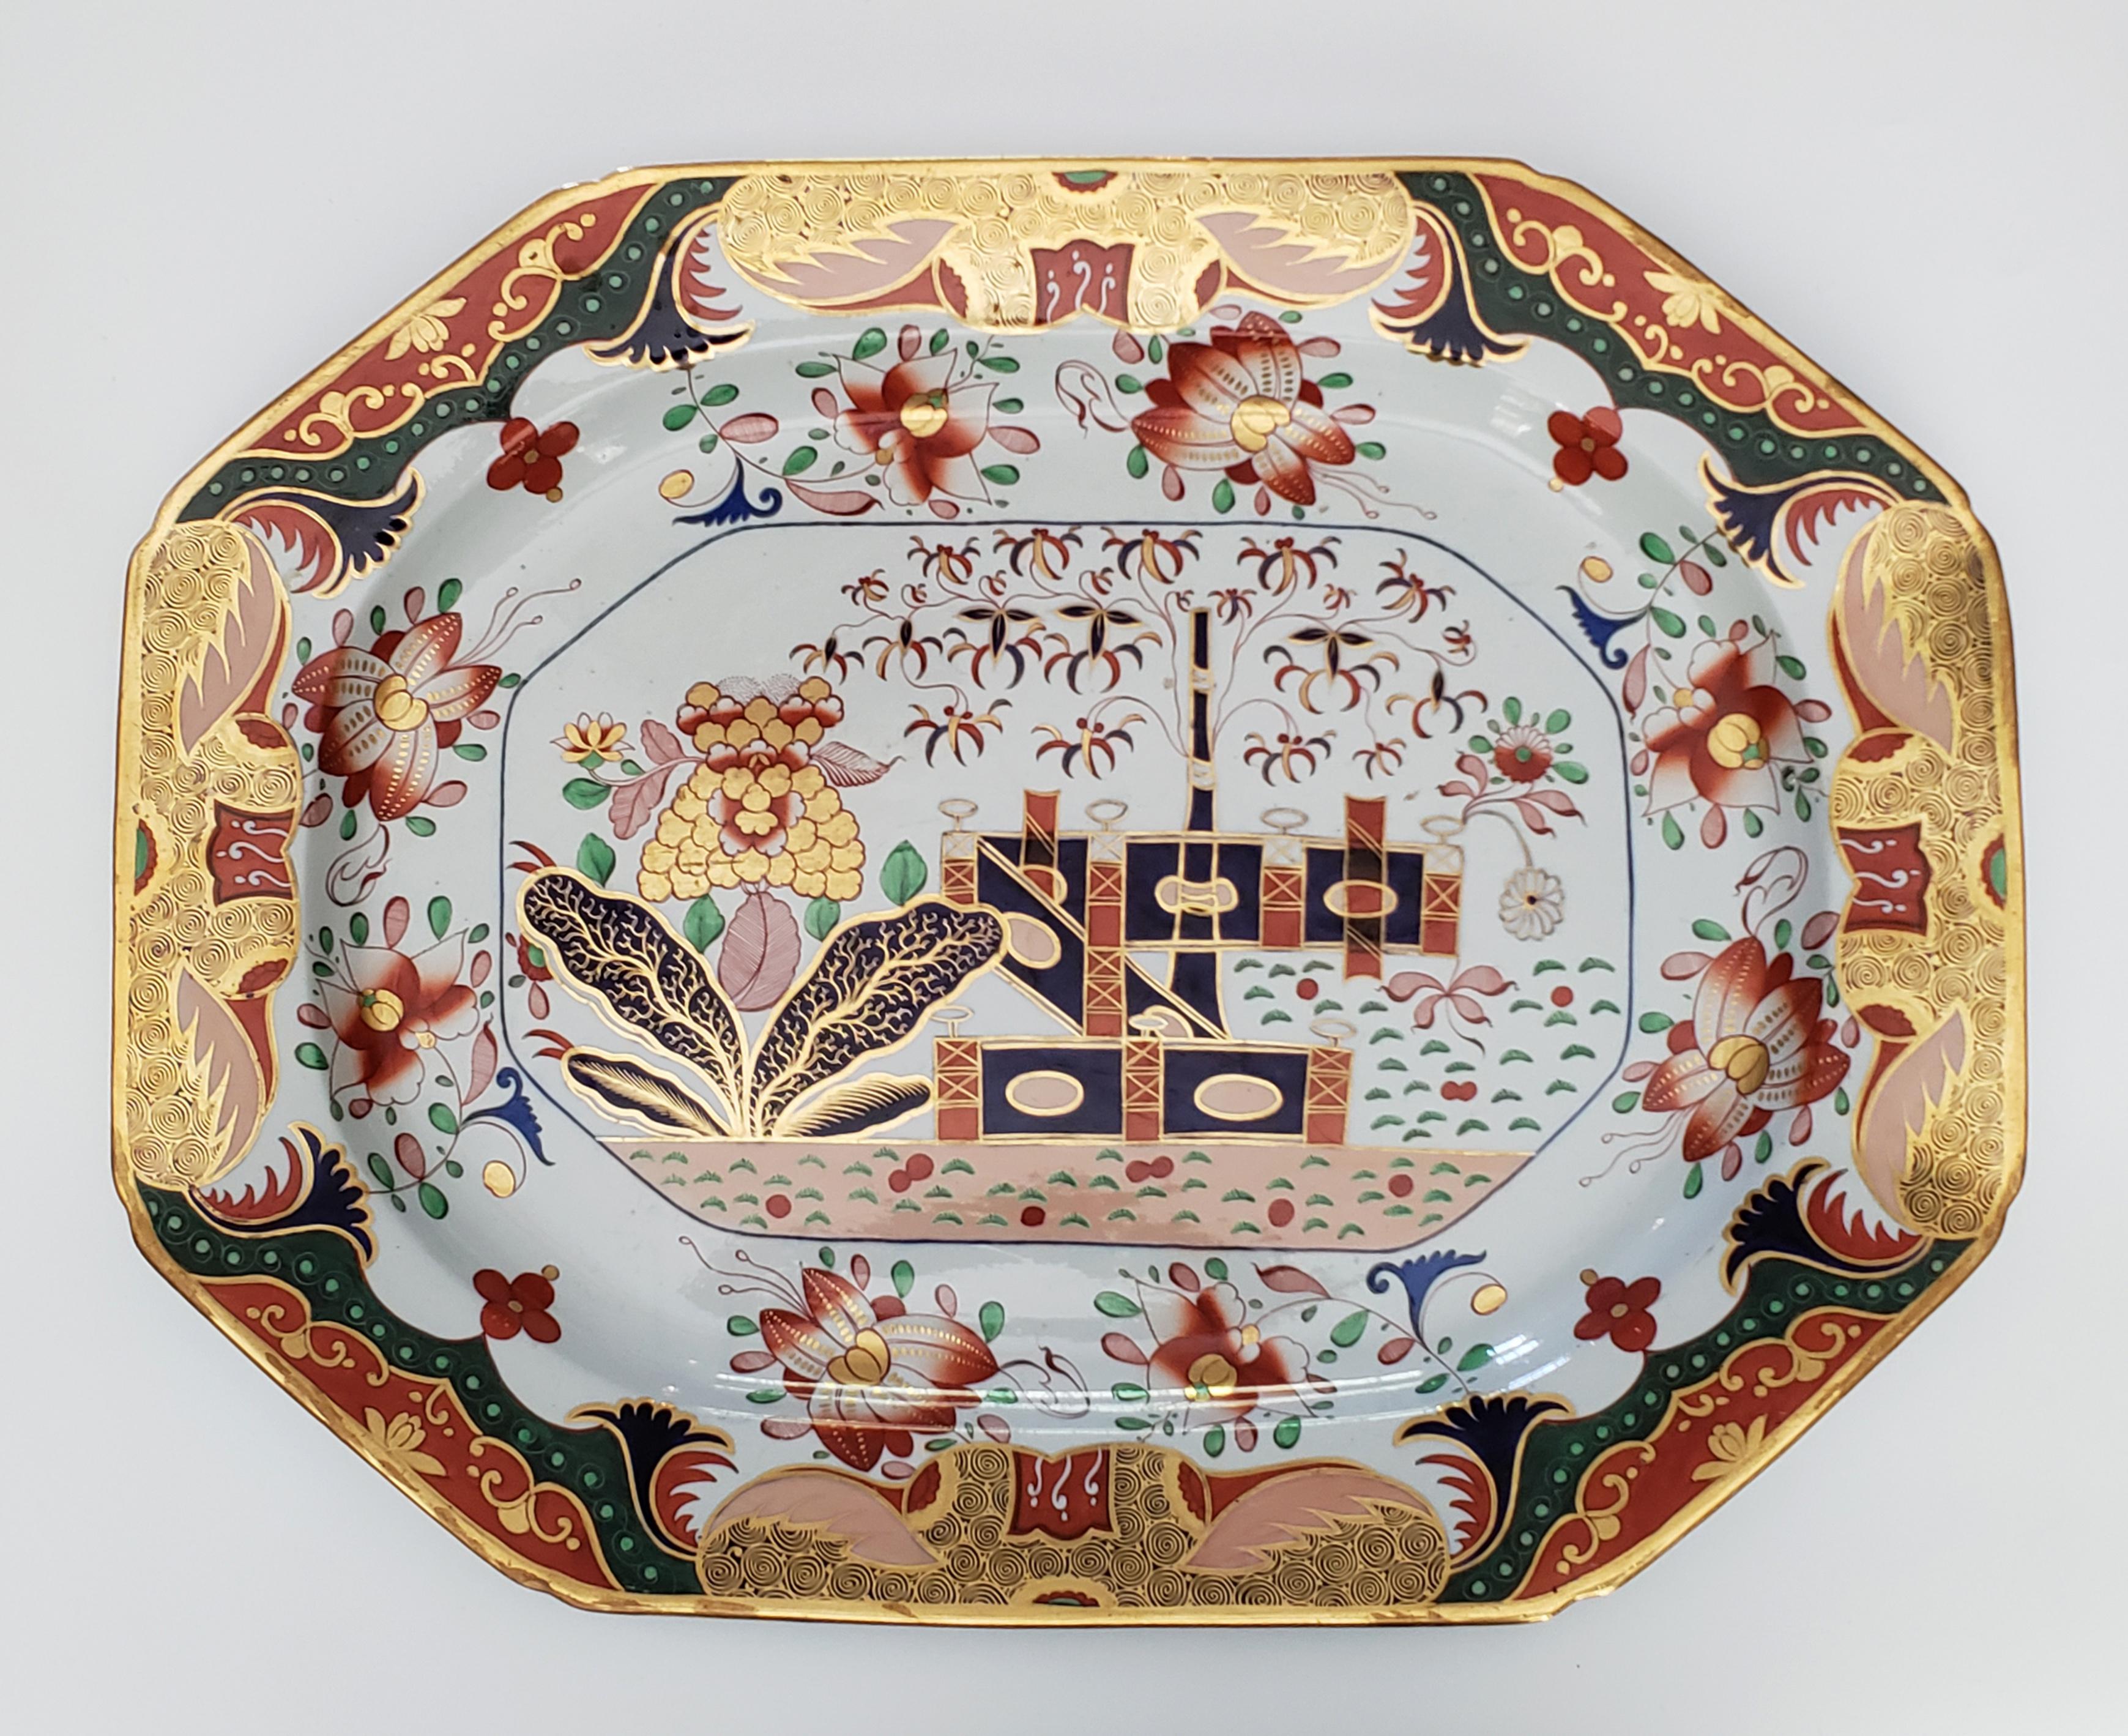 Spode porcelain 967 pattern very large serving dish,
NWith a tray table,
Circa 1810

The very large Spode porcelain serving dish of rectangular shape with canted corners painted with the Spode 967 Chinoiserie pattern and mounted on a wooden stand to